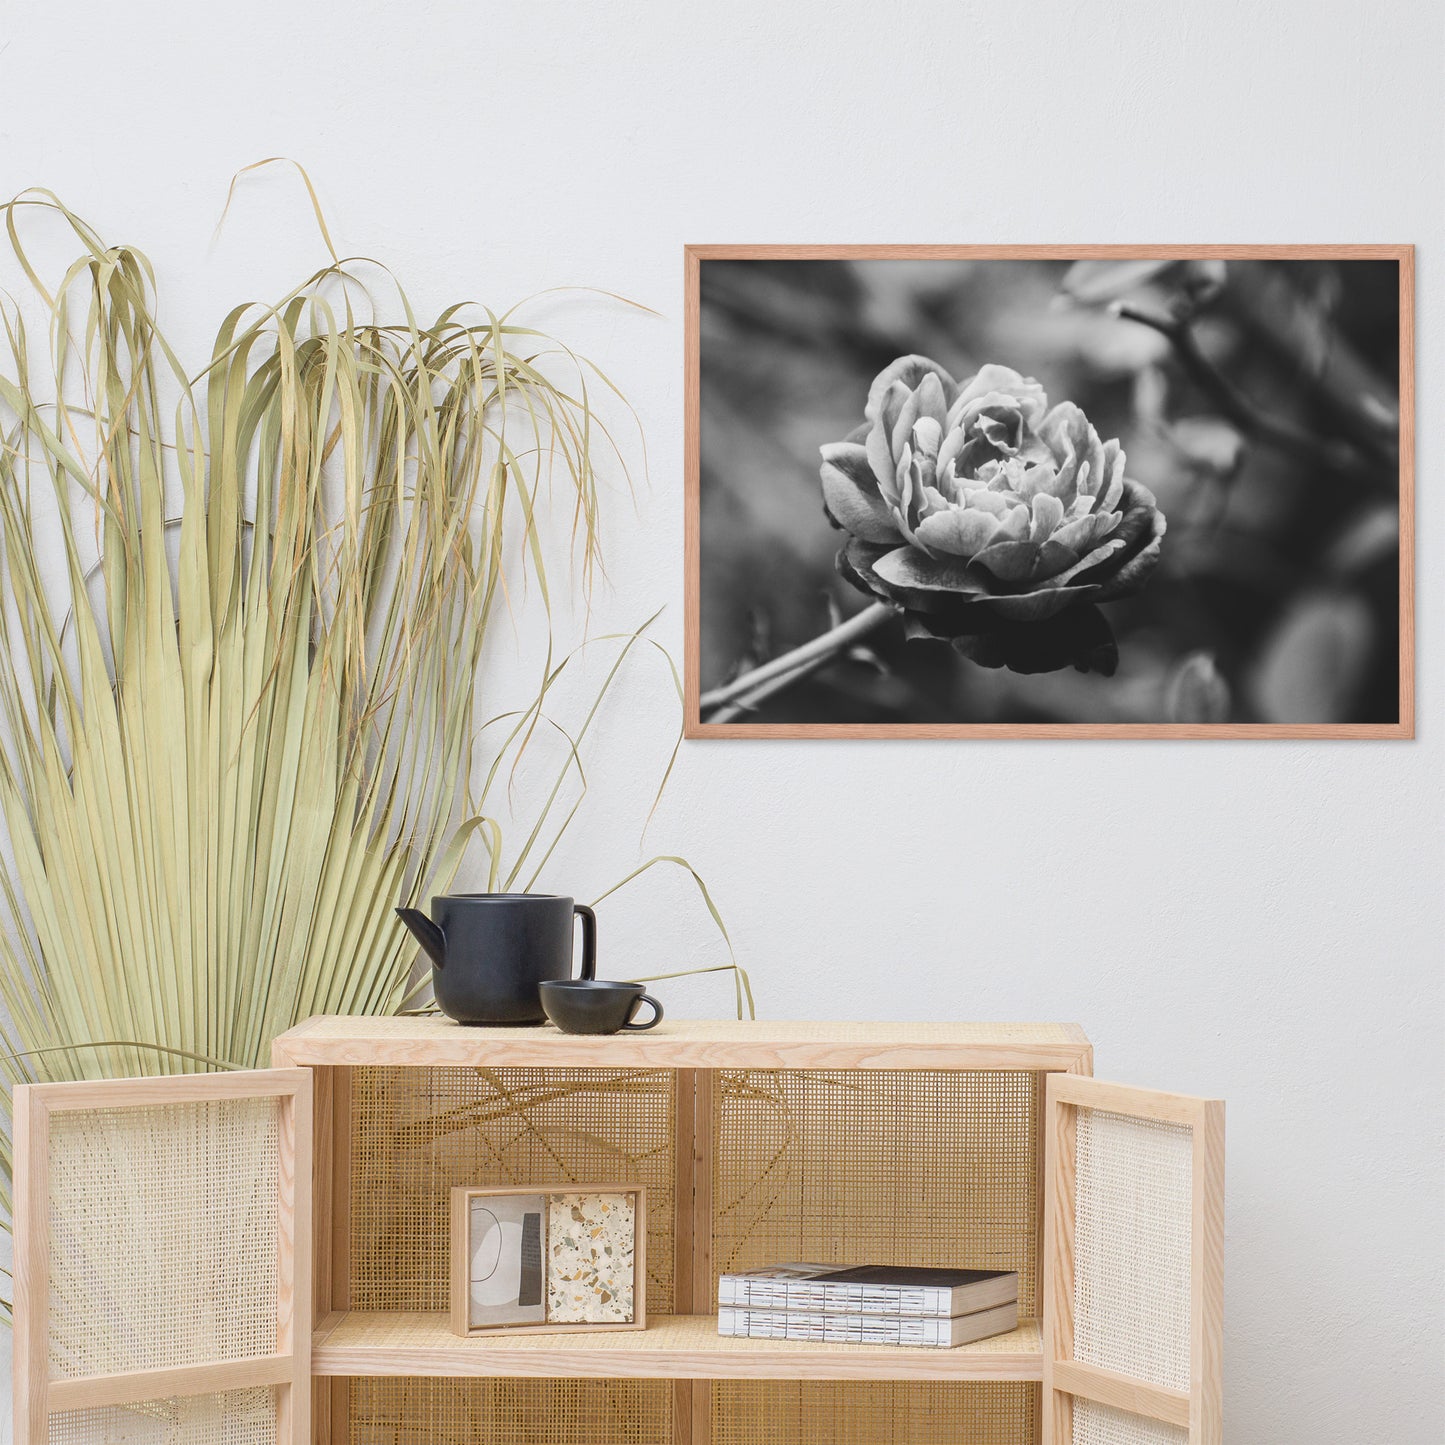 Perfect Petals Black and White Floral Nature Photo Framed Wall Art Print